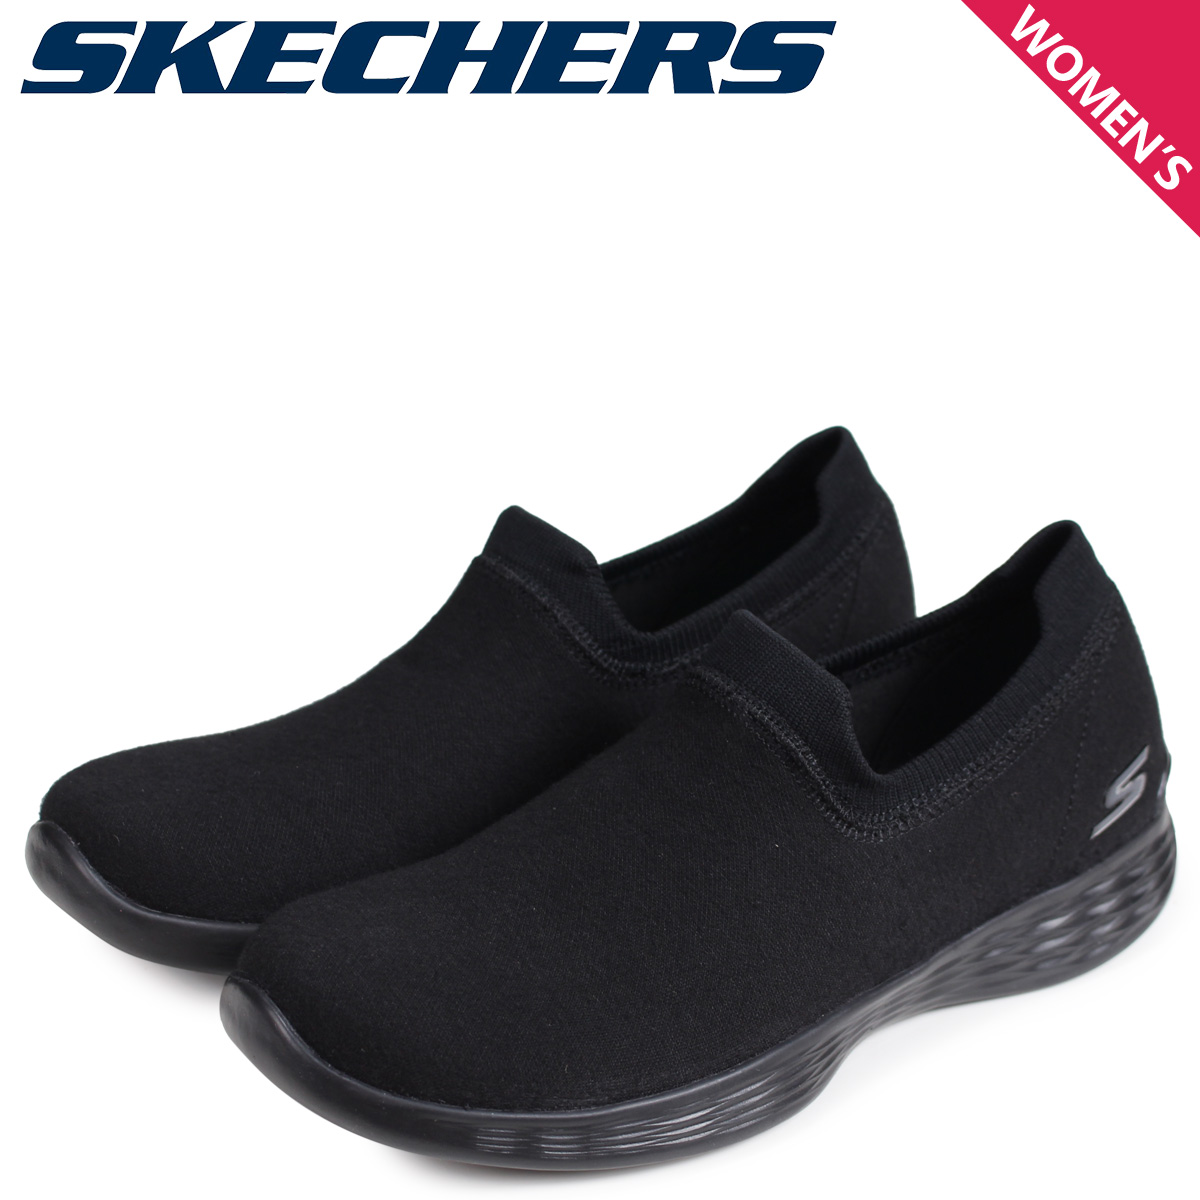 skechers you define perfection